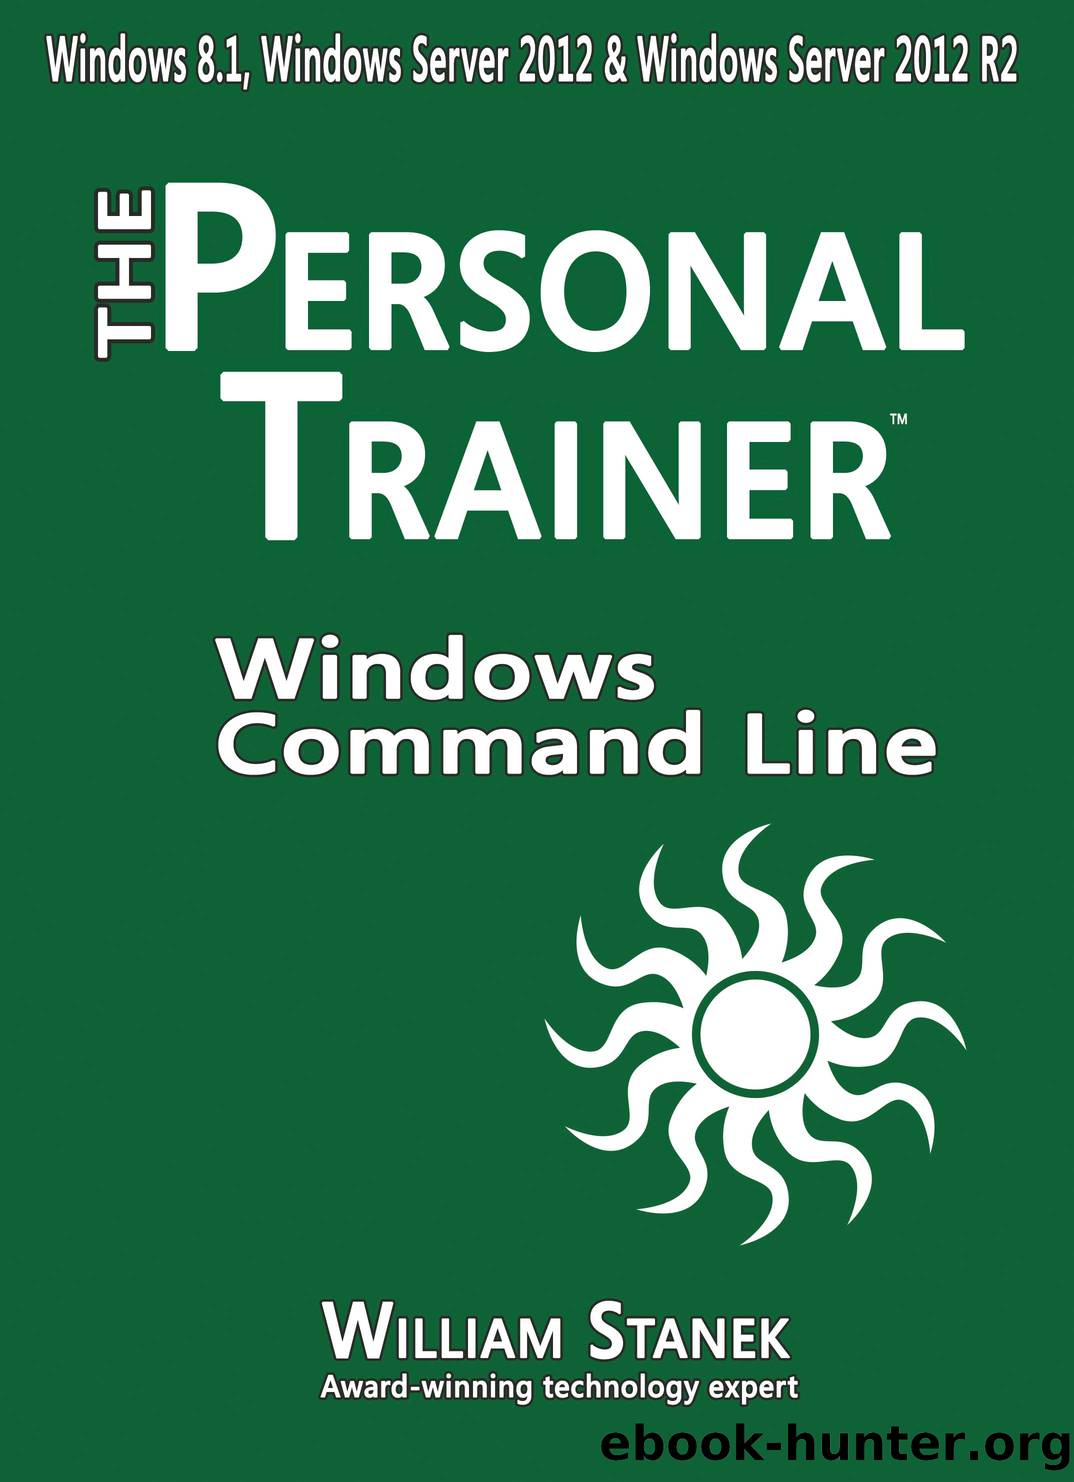 Windows Command Line by William Stanek